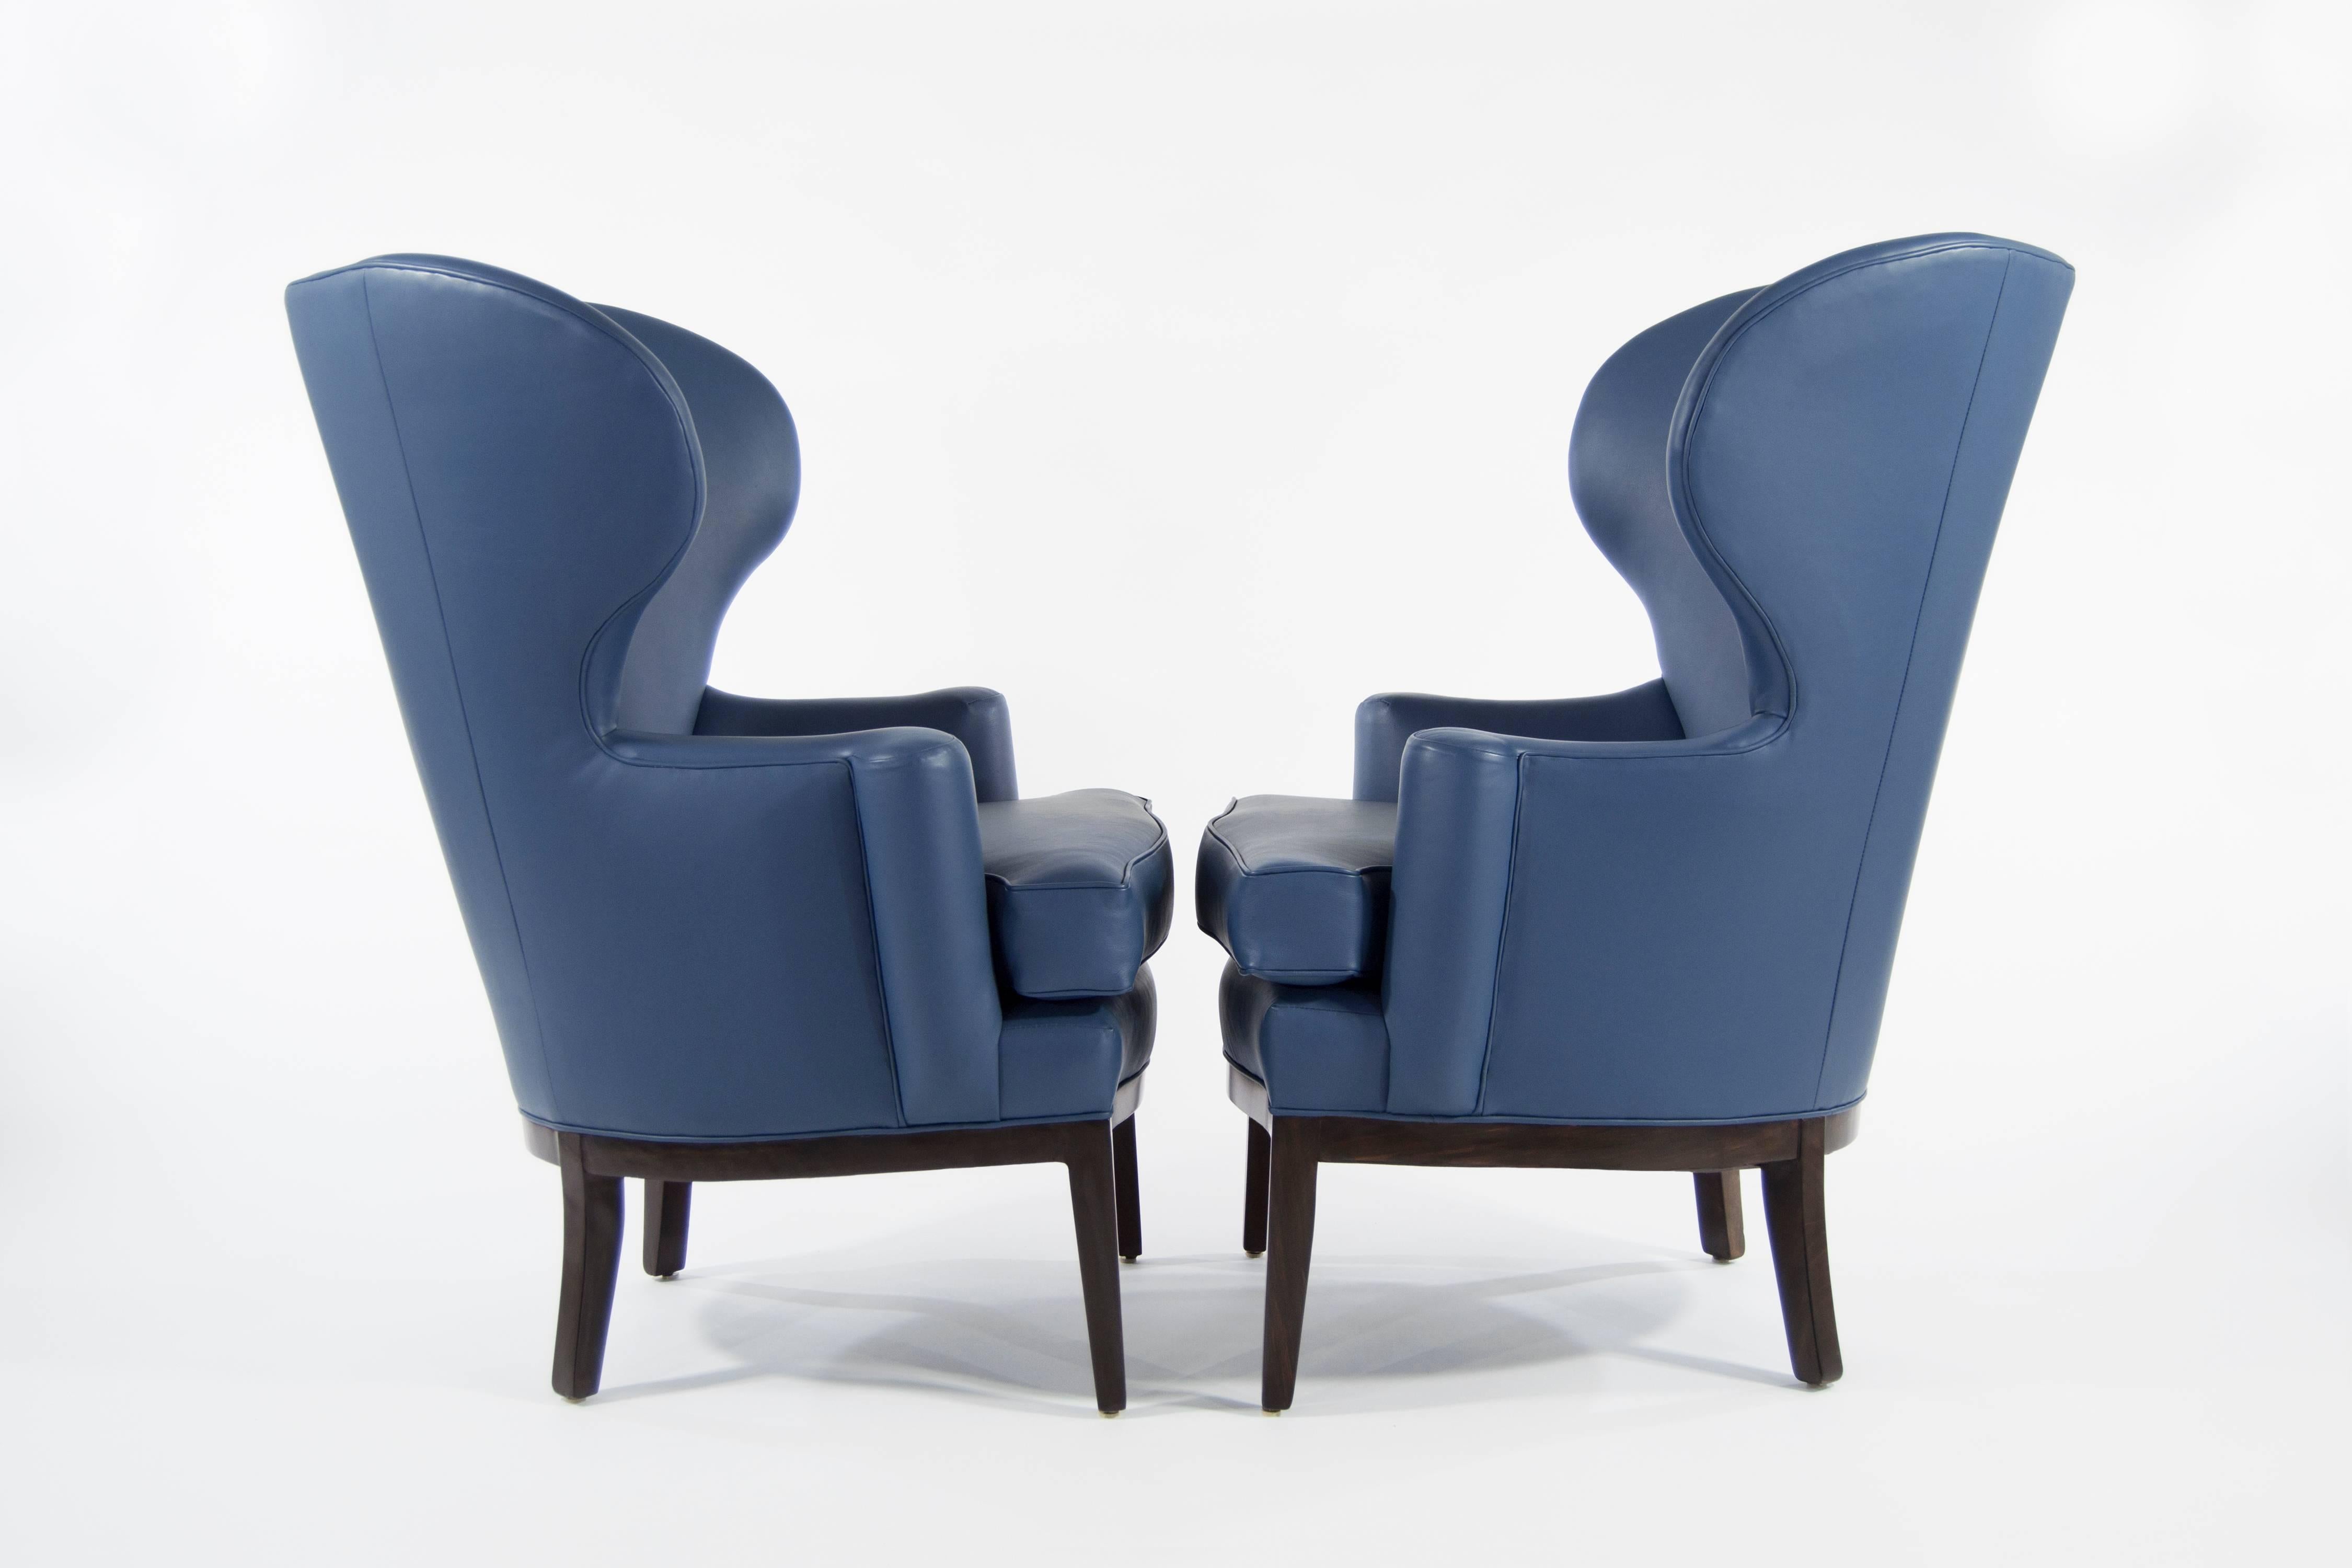 Extremely rare pair of early wingback chairs designed by Edward Wormley for Dunbar, circa 1940s. Newly upholstered in blue Spinneybeck leather, walnut bases fully restored. Priced and available individually.